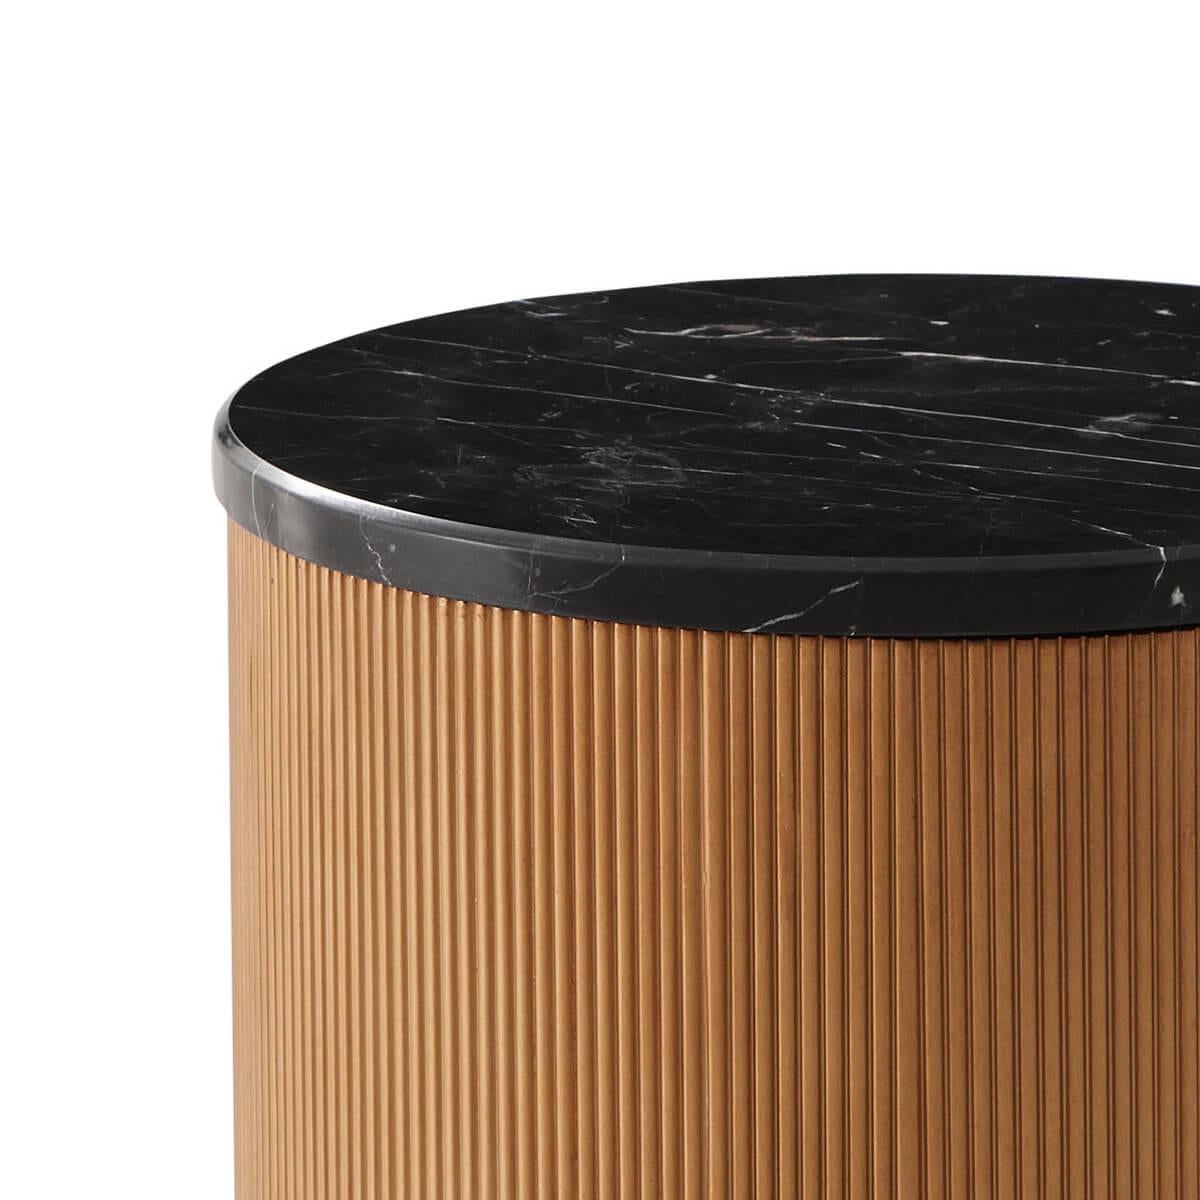 A cylindrical form round Nero Marquina marble top accent table with a reeded frame.

Dimensions: 14.5